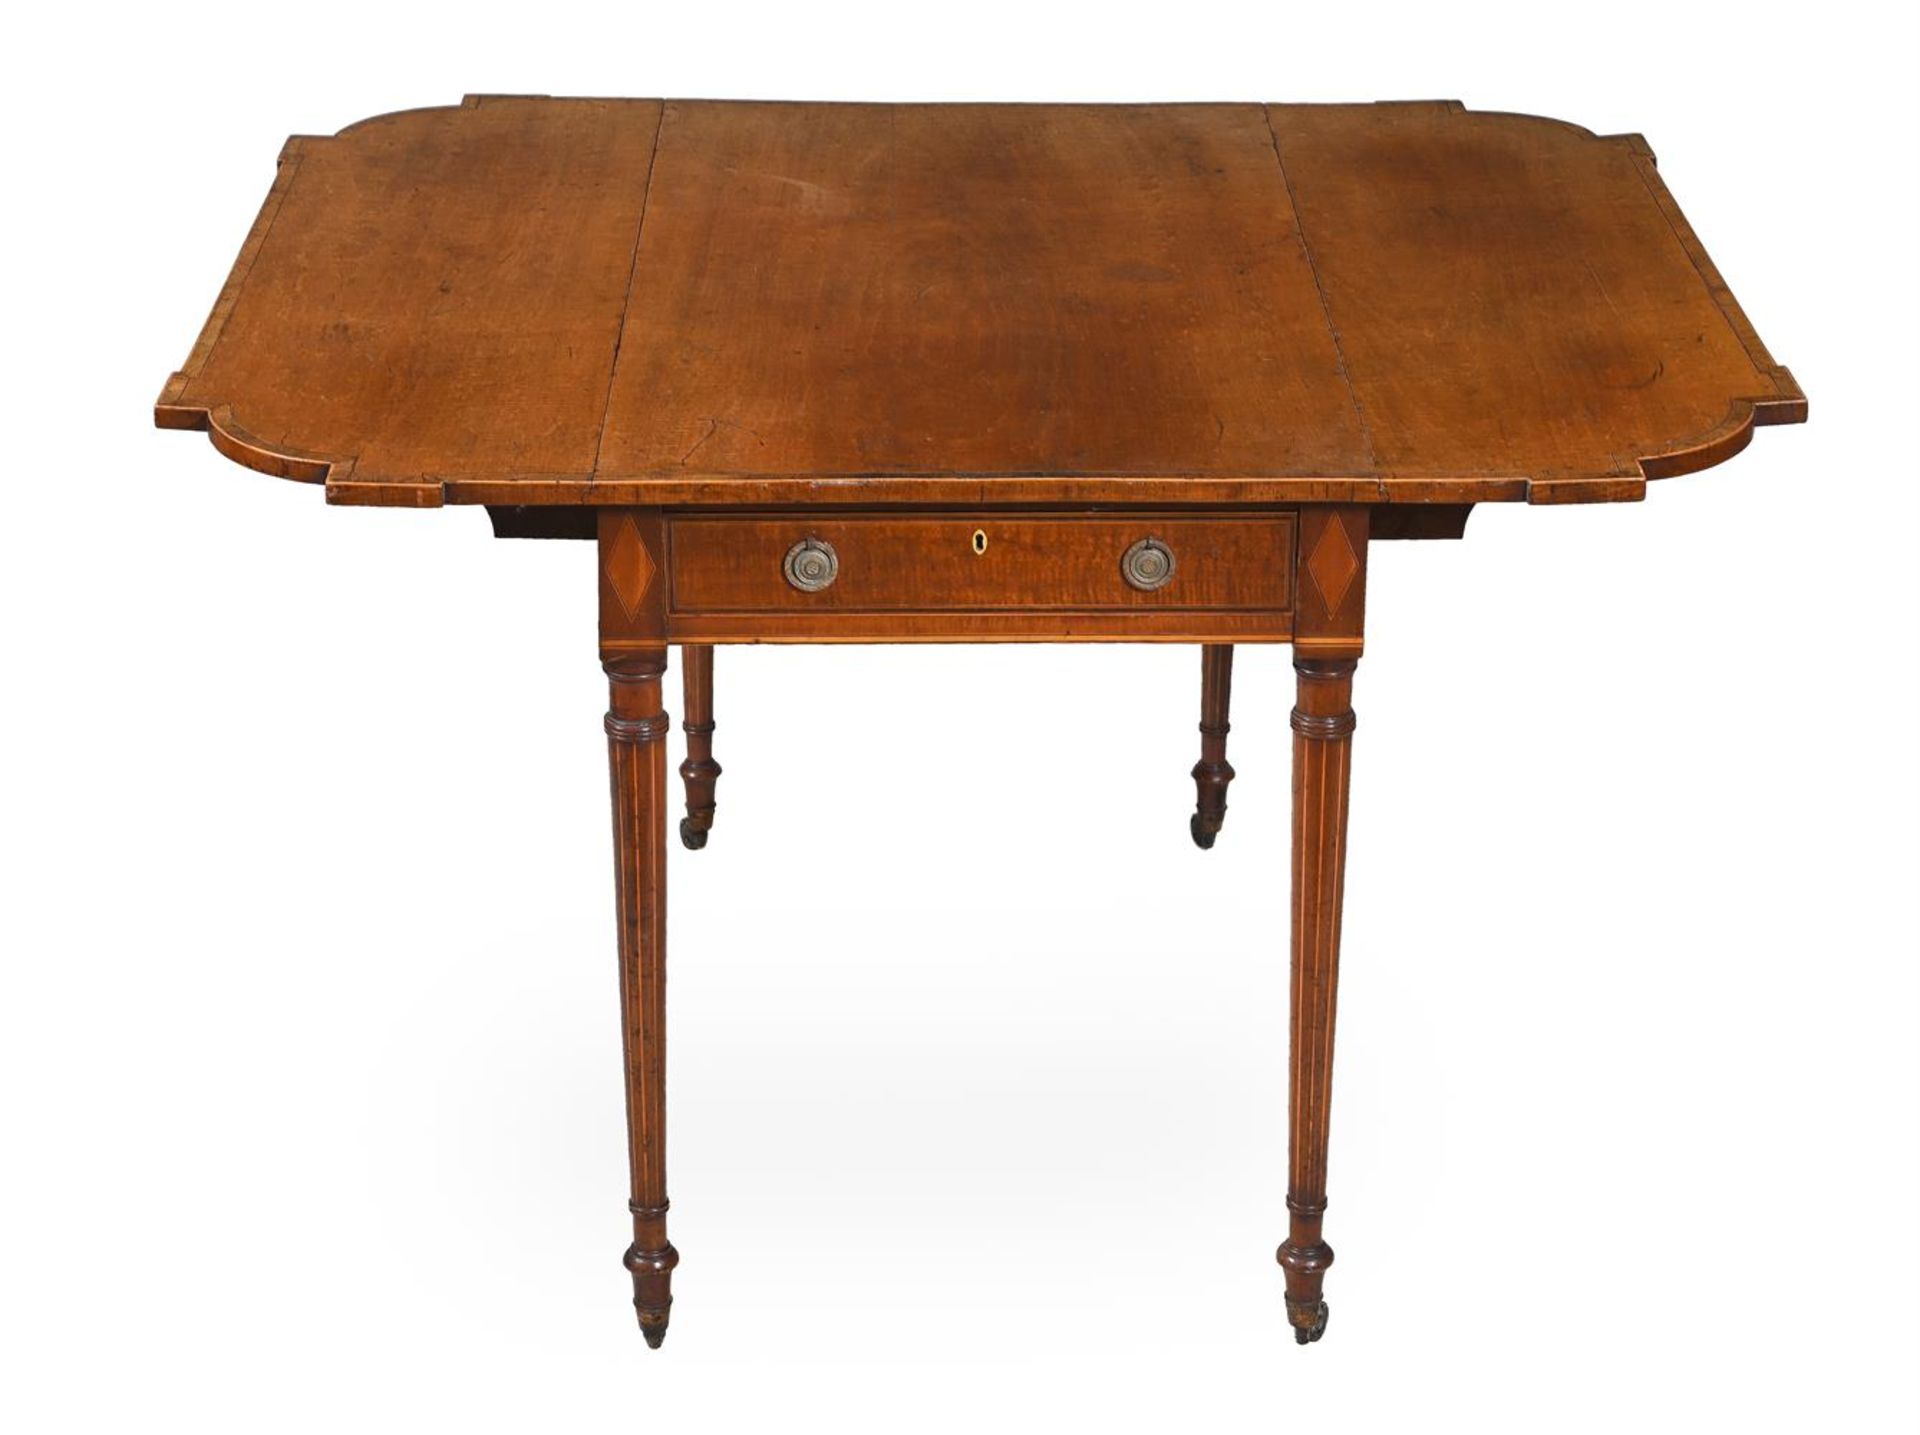 Y A GEORGE III 'FIDDLE BACK' MAHOGANY, ROSEWOOD CROSSBANDED AND LINE INLAID PEMBROKE TABLE - Image 4 of 5